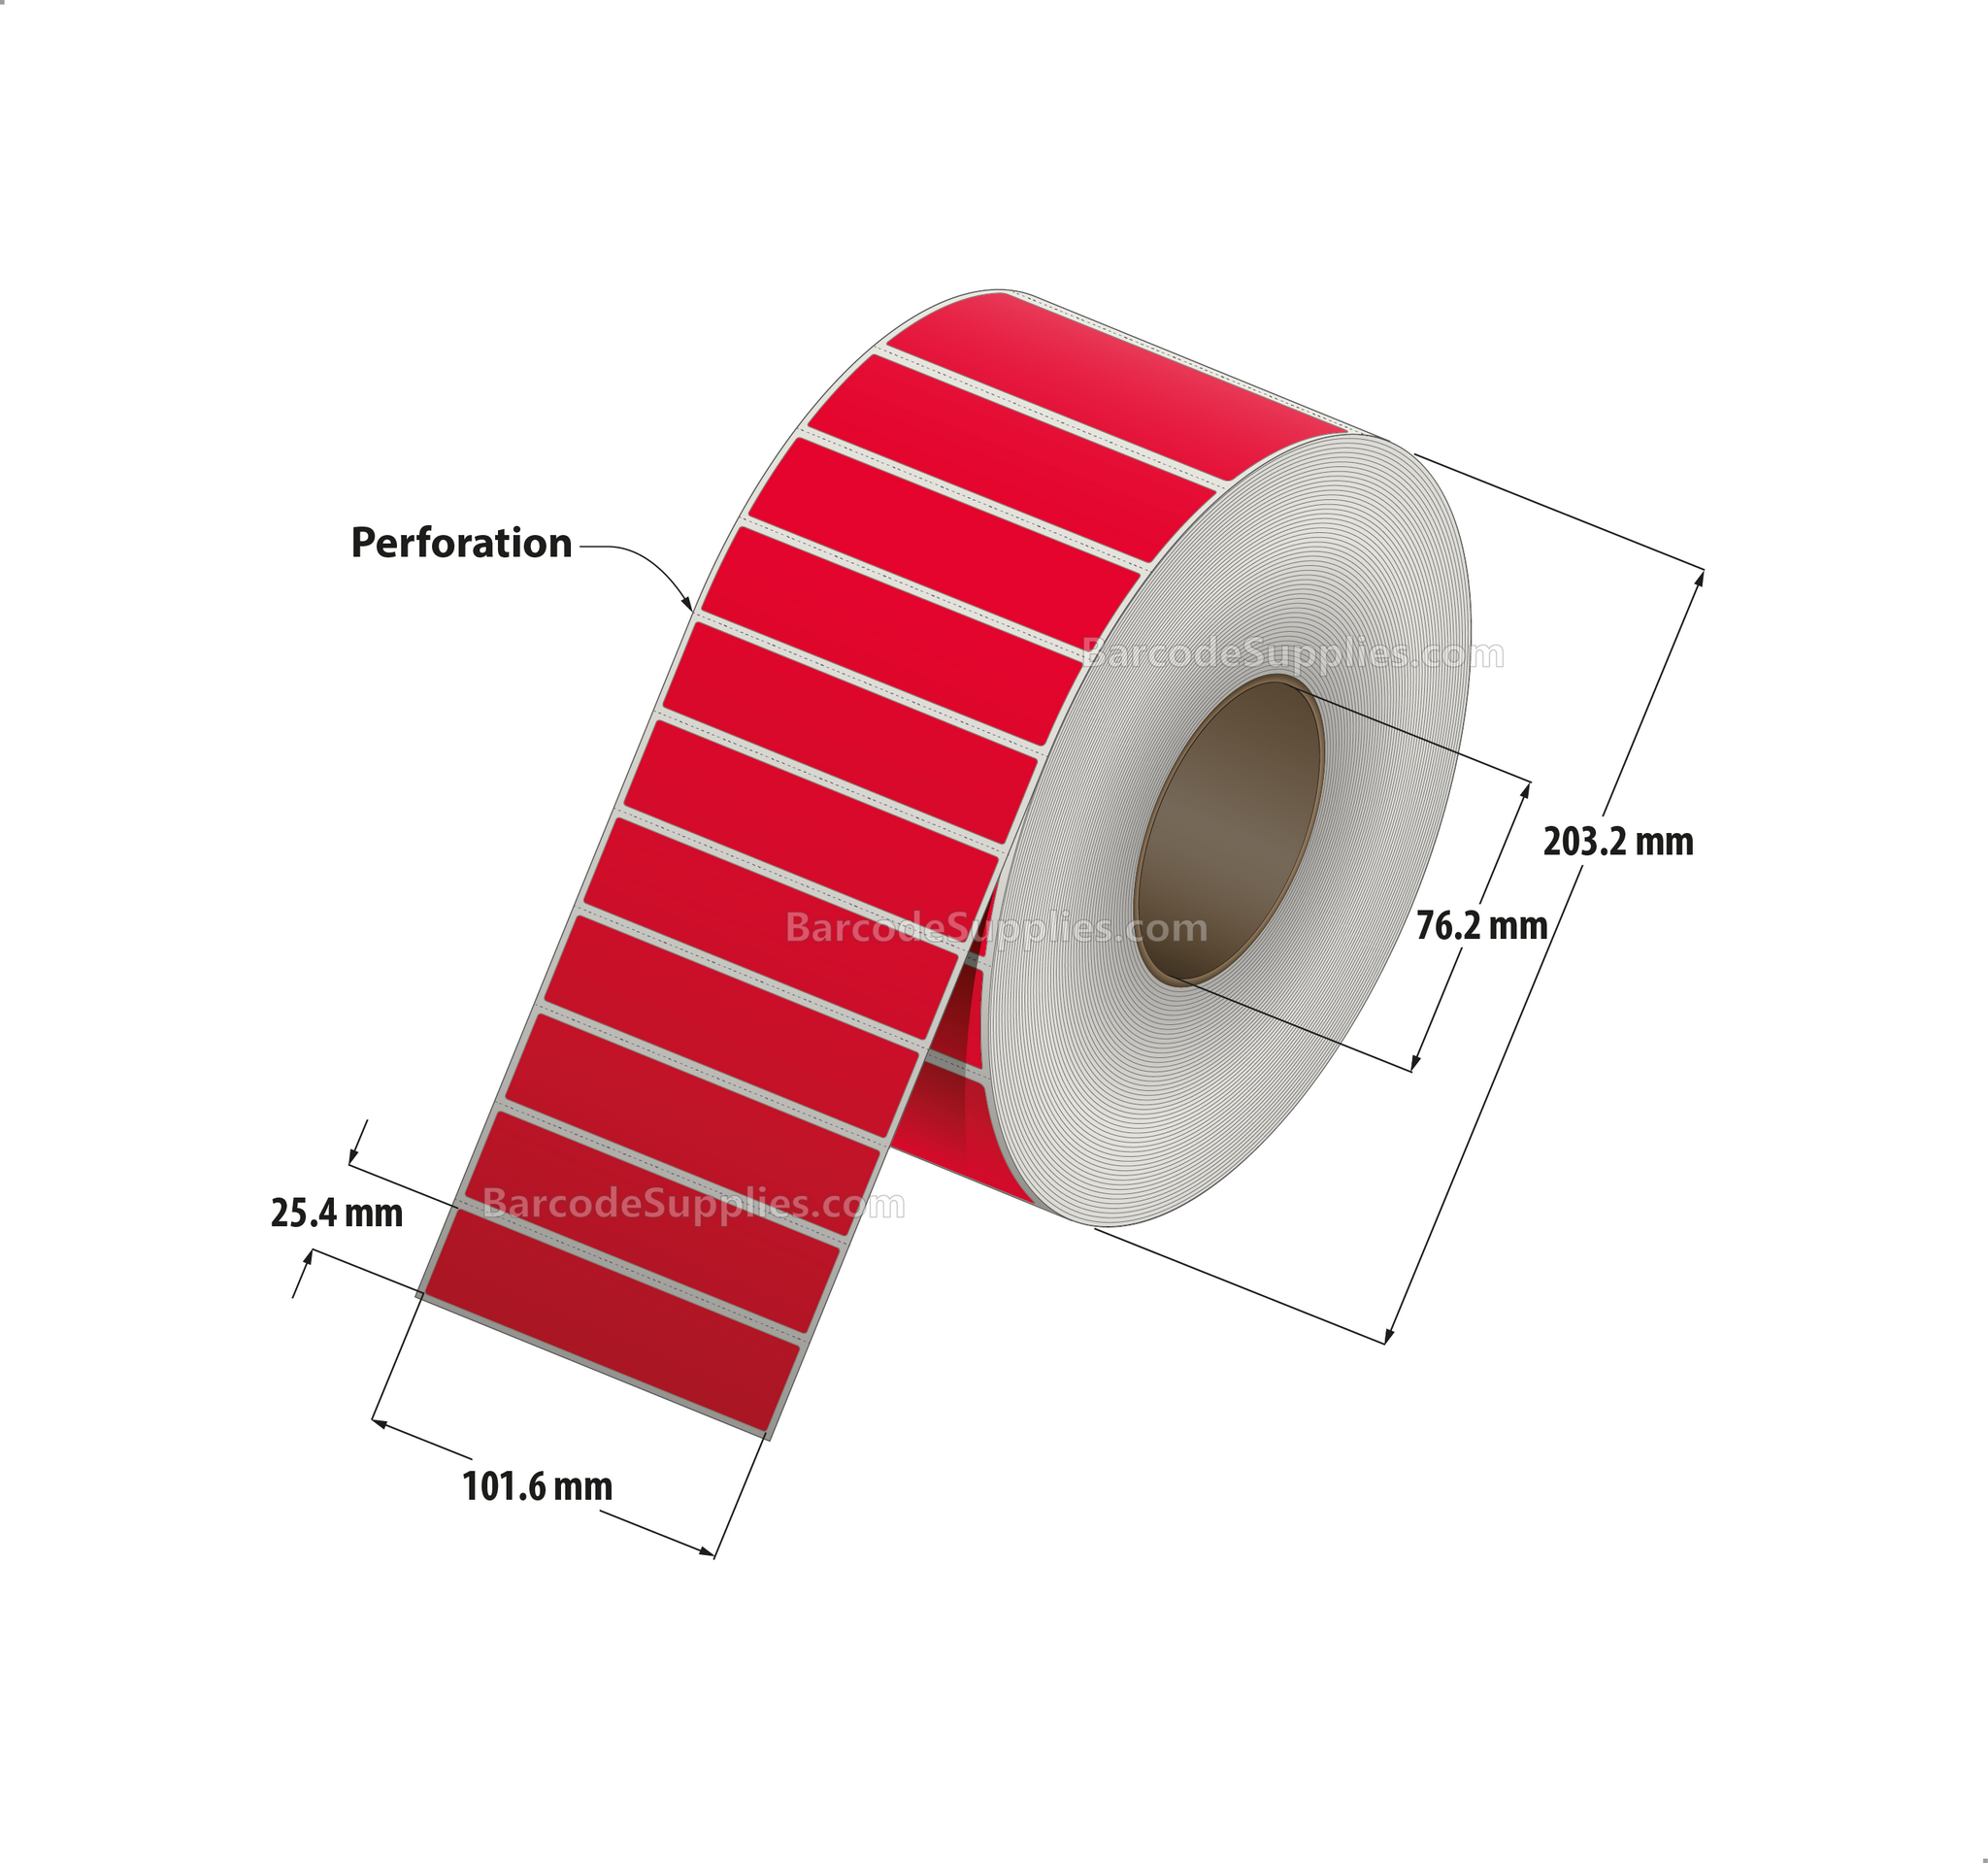 4 x 1 Thermal Transfer 032 Red Labels With Permanent Adhesive - Perforated - 5500 Labels Per Roll - Carton Of 4 Rolls - 22000 Labels Total - MPN: RFC-4-1-5500-RD